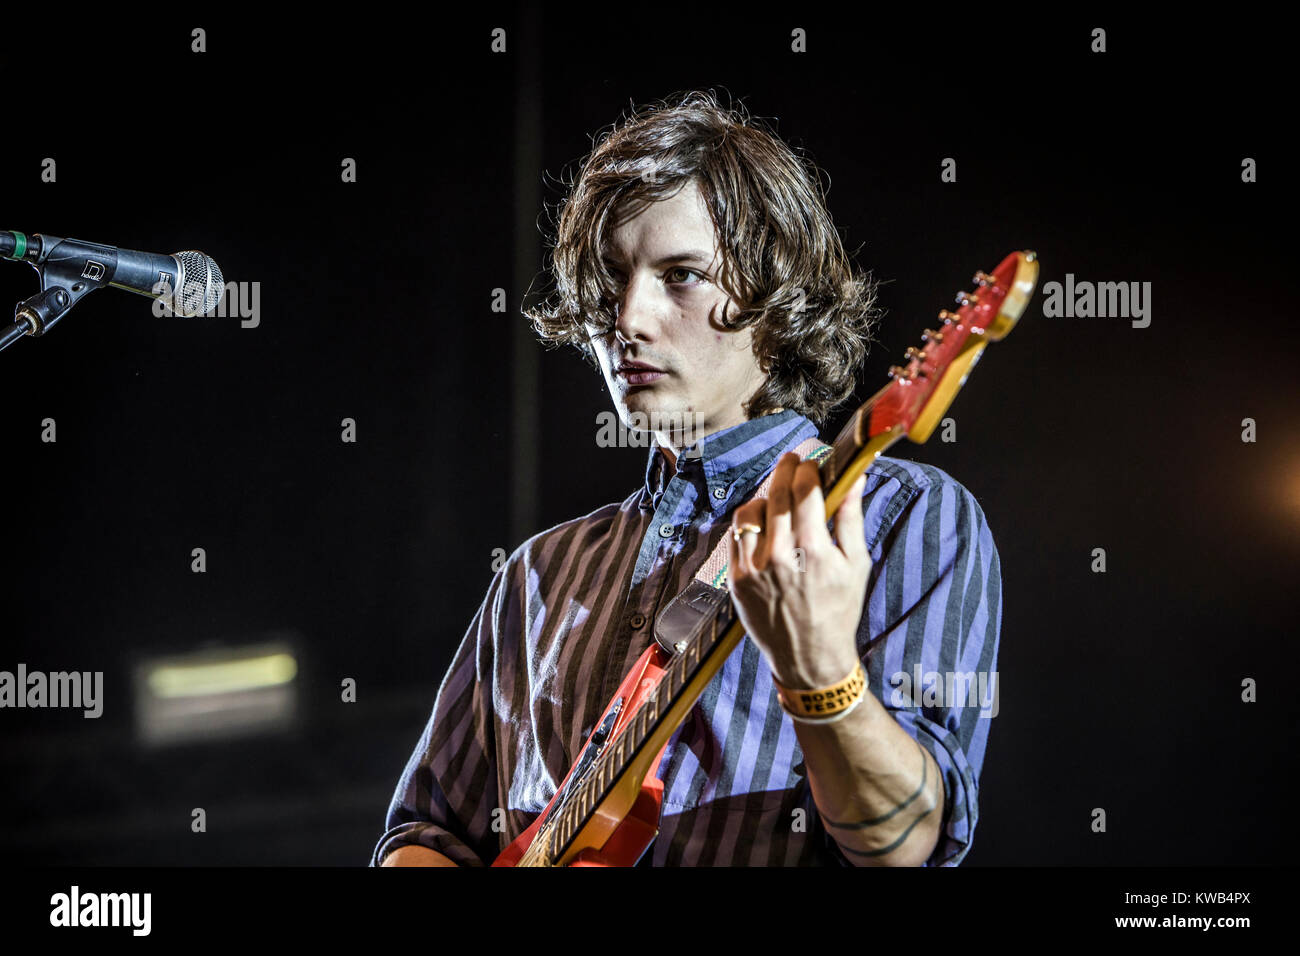 The American indie rock band Deerhunter performs a live concert at the Arena Stage at Roskilde Festival 2014. Here guitarist and musician Lockett Pundt is pictured live on stage. Denmark 06.07.2014. Stock Photo